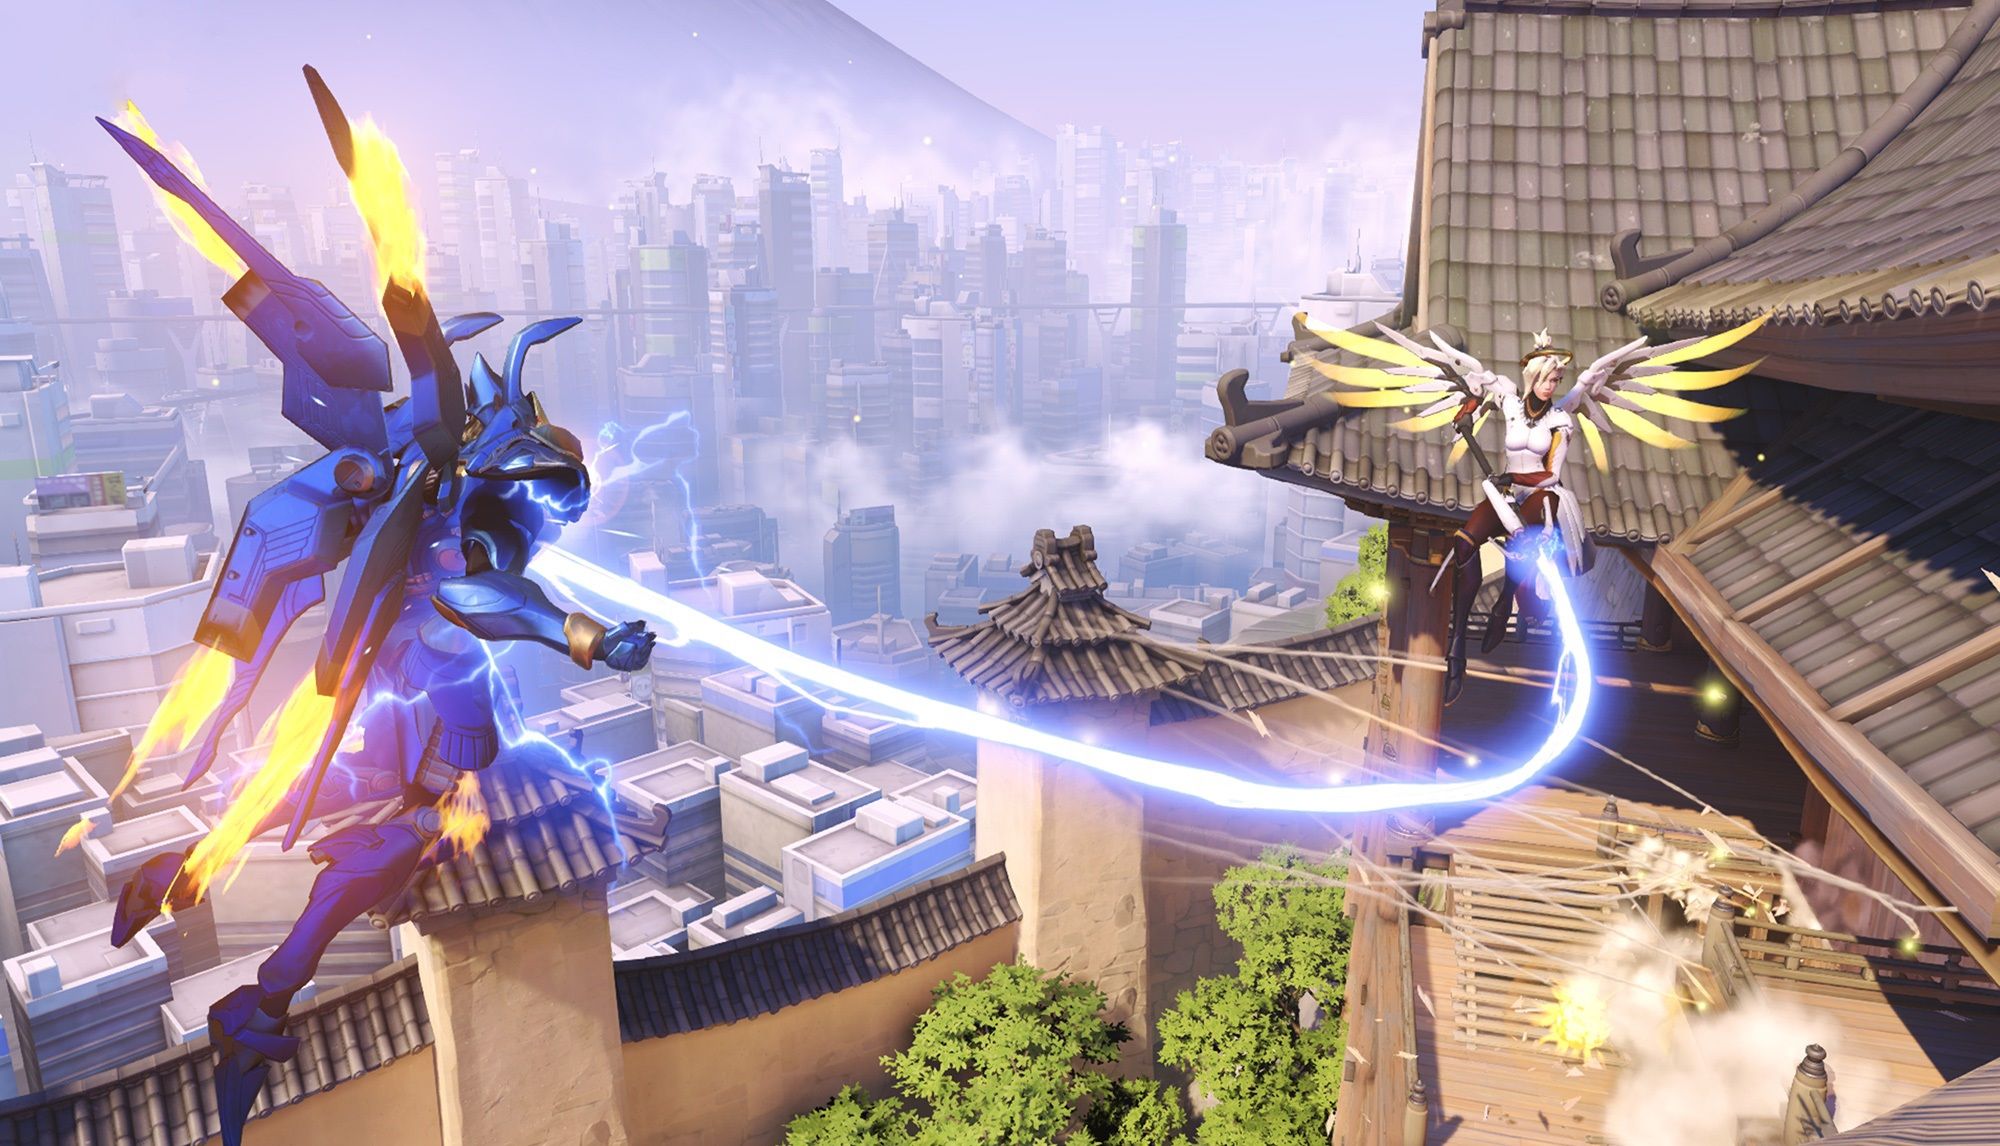 [BlizzCon 2016] Due nuove mappe in arrivo per Overwatch